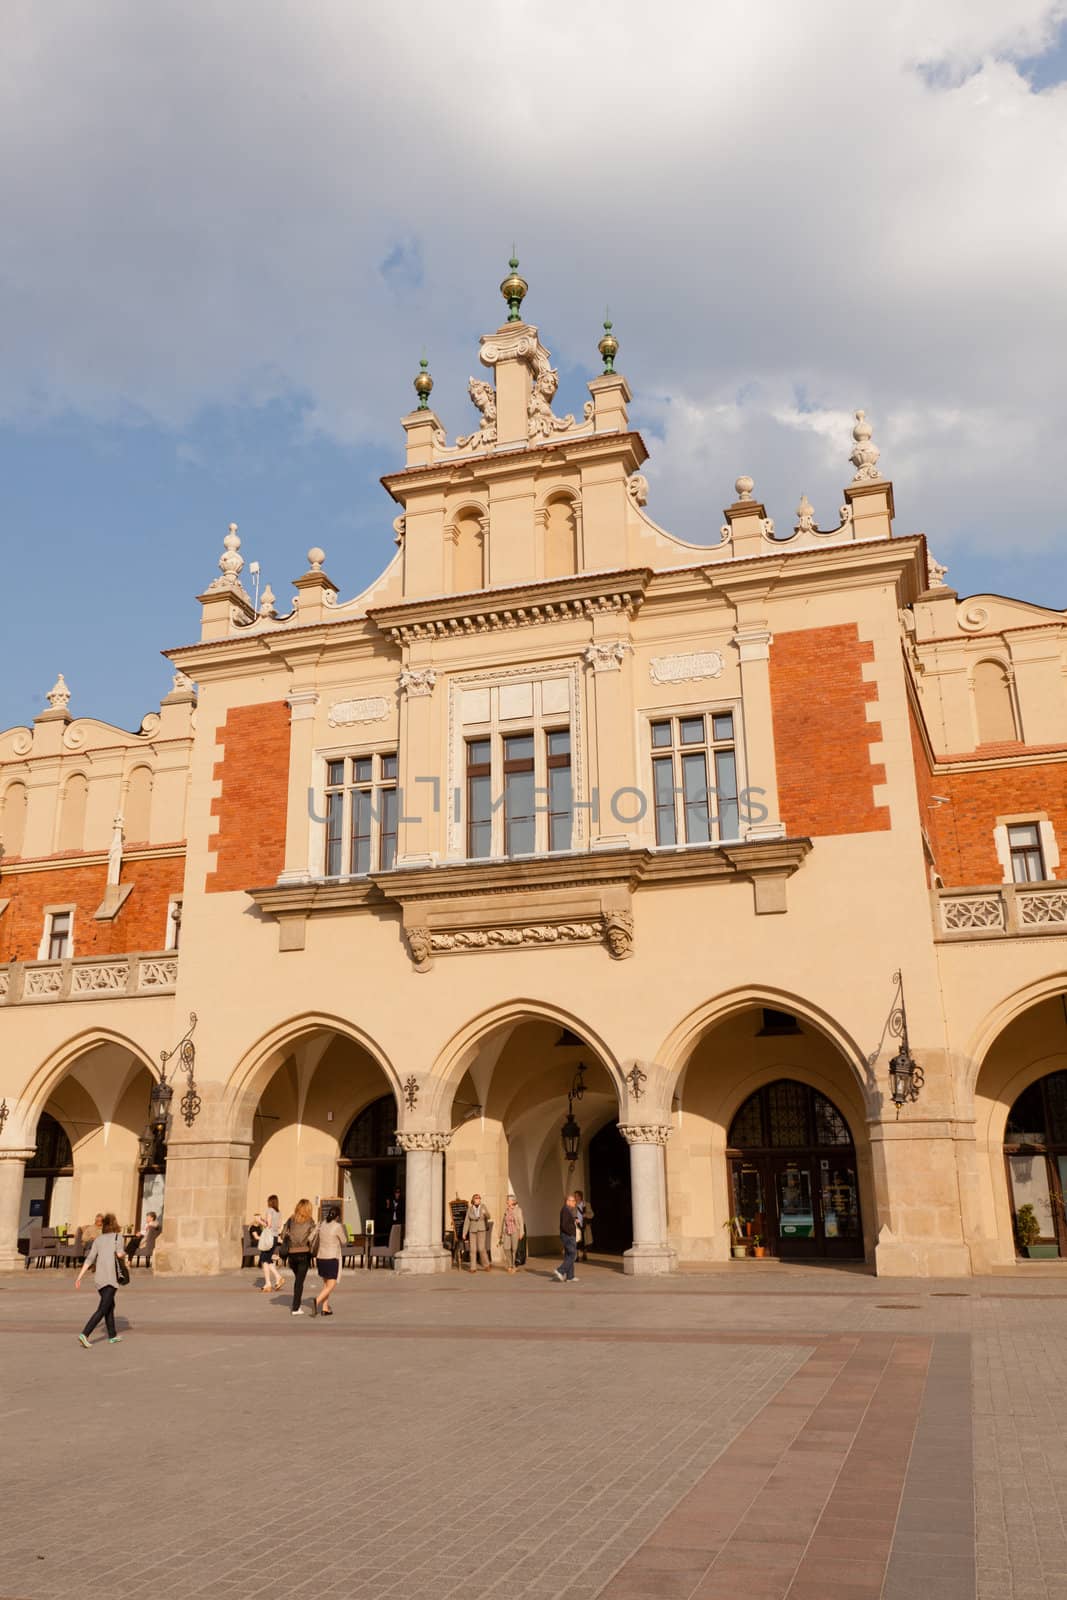 Renaissance Sukiennice (Cloth Hall, Drapers' Hall) in Kraków, Poland, is one of the city's most recognizable icons.